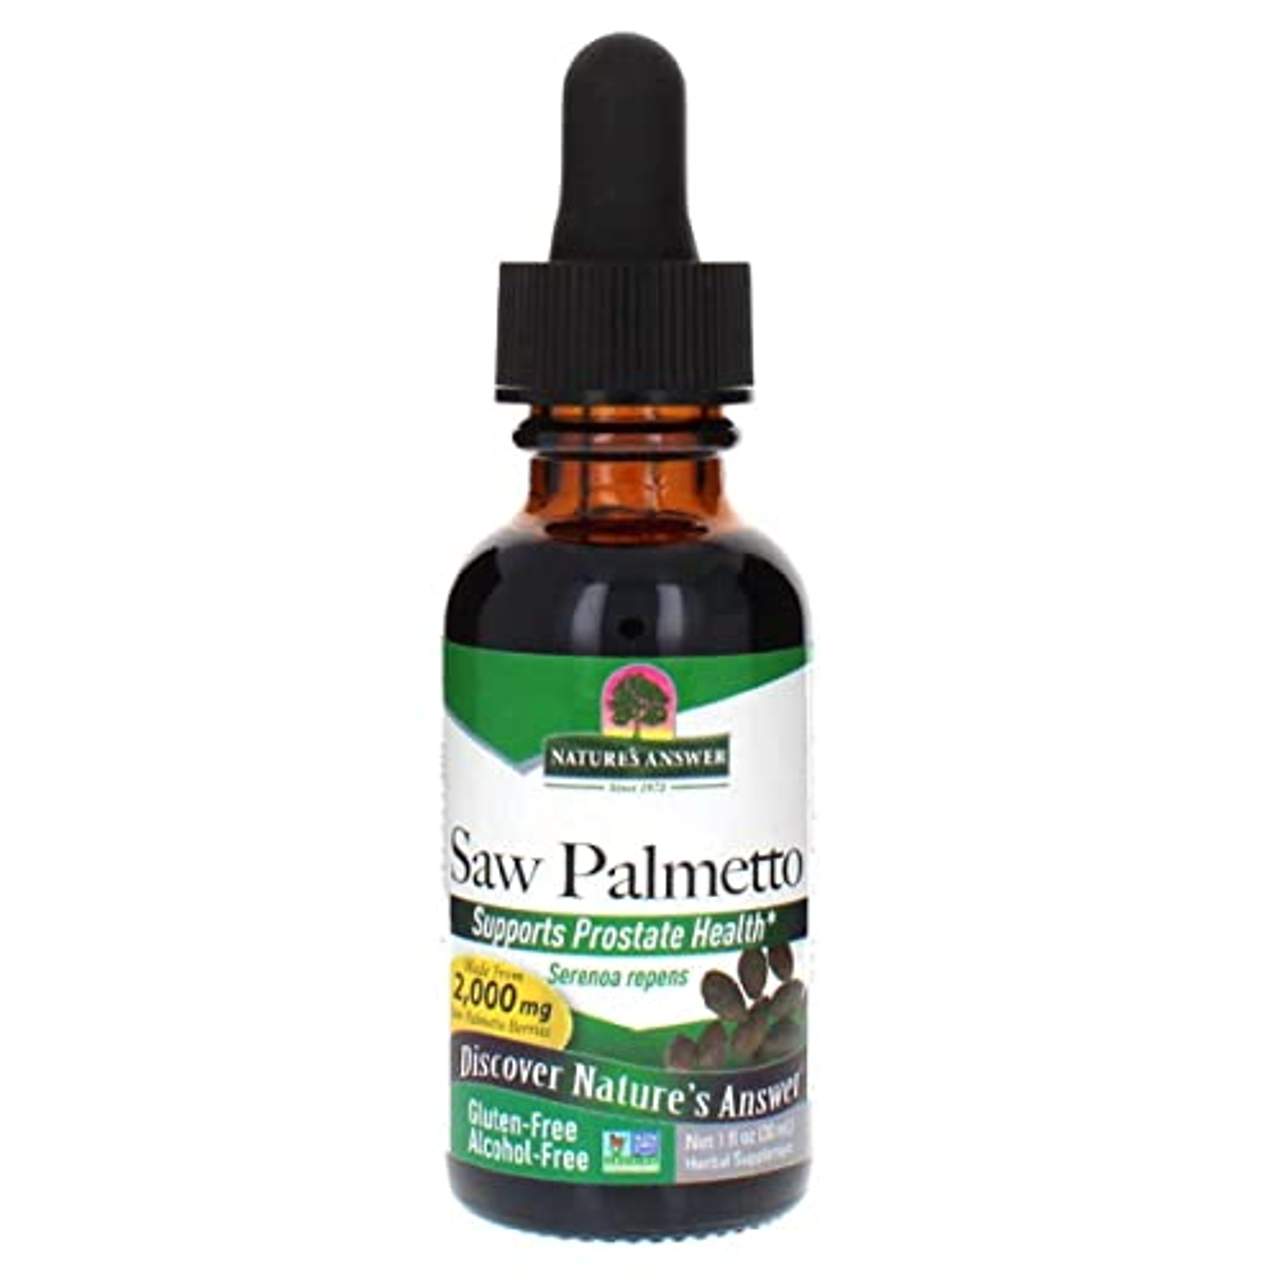 Nature's Answer Saw Palmetto Extract